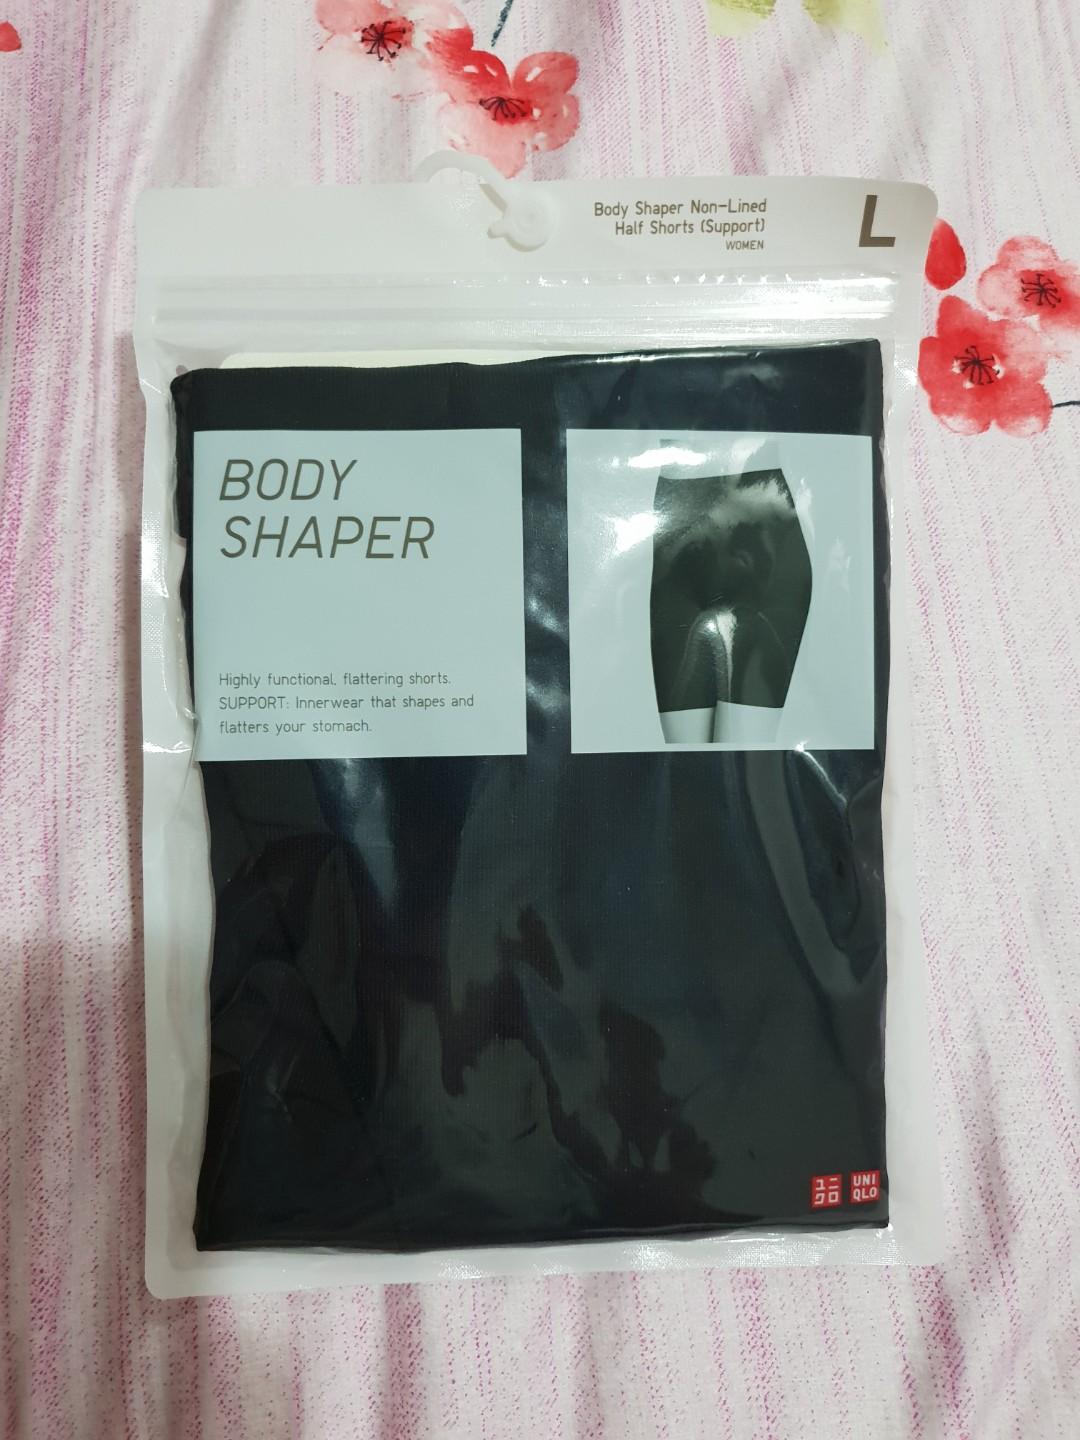 AIRISM BODY SILHOUETTE SHAPER NON-LINED HALF SHORTS